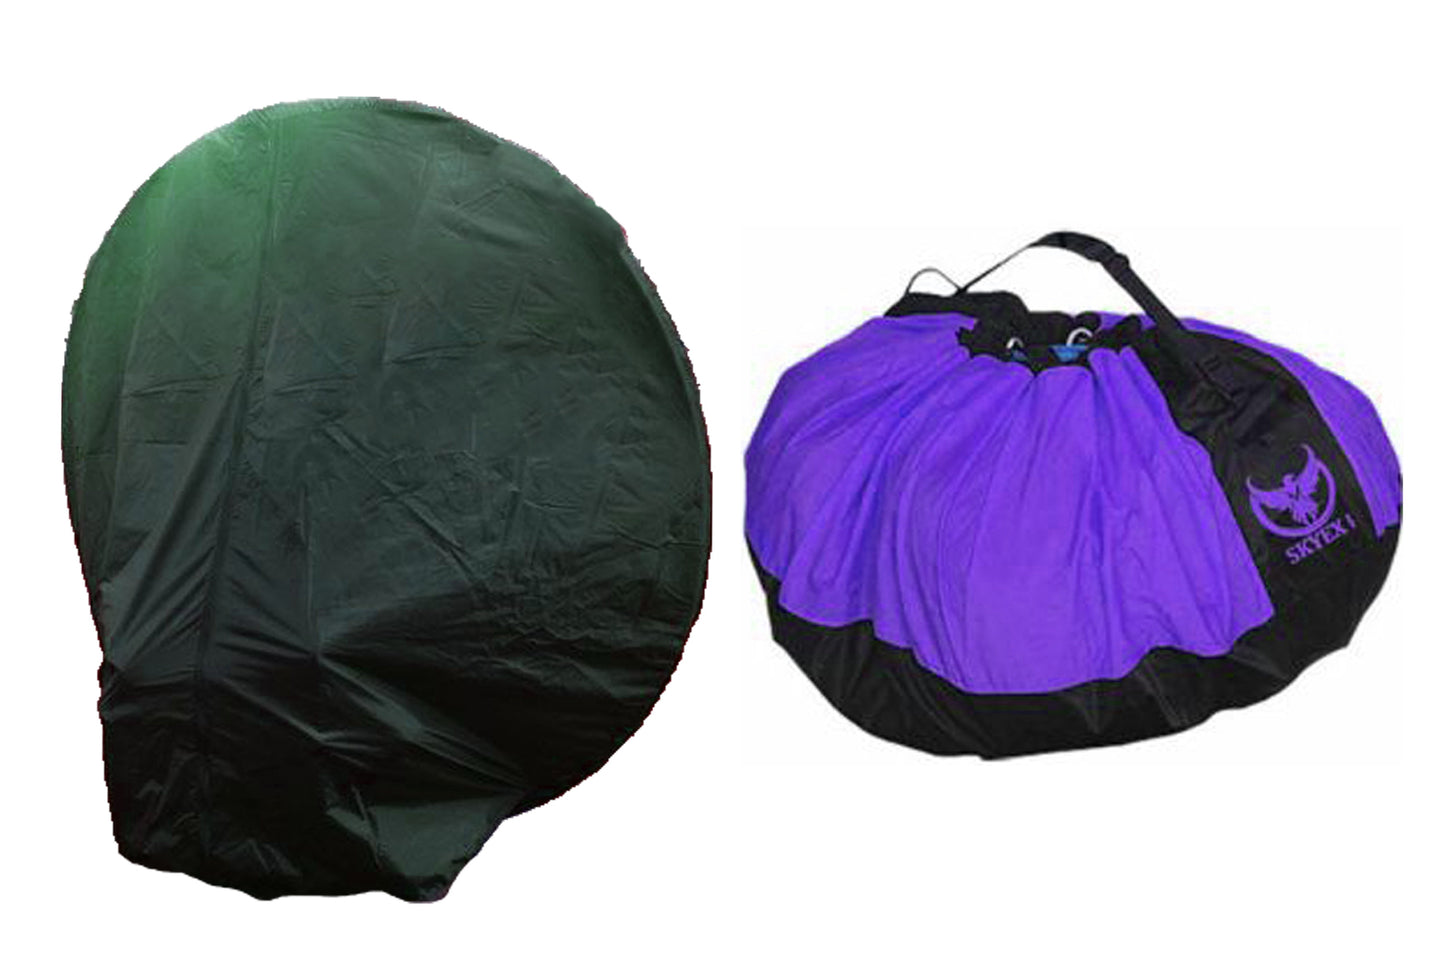 Paragliding Quick Bag | Best Paramotor Dust Cover-0005 | Skyexsuits